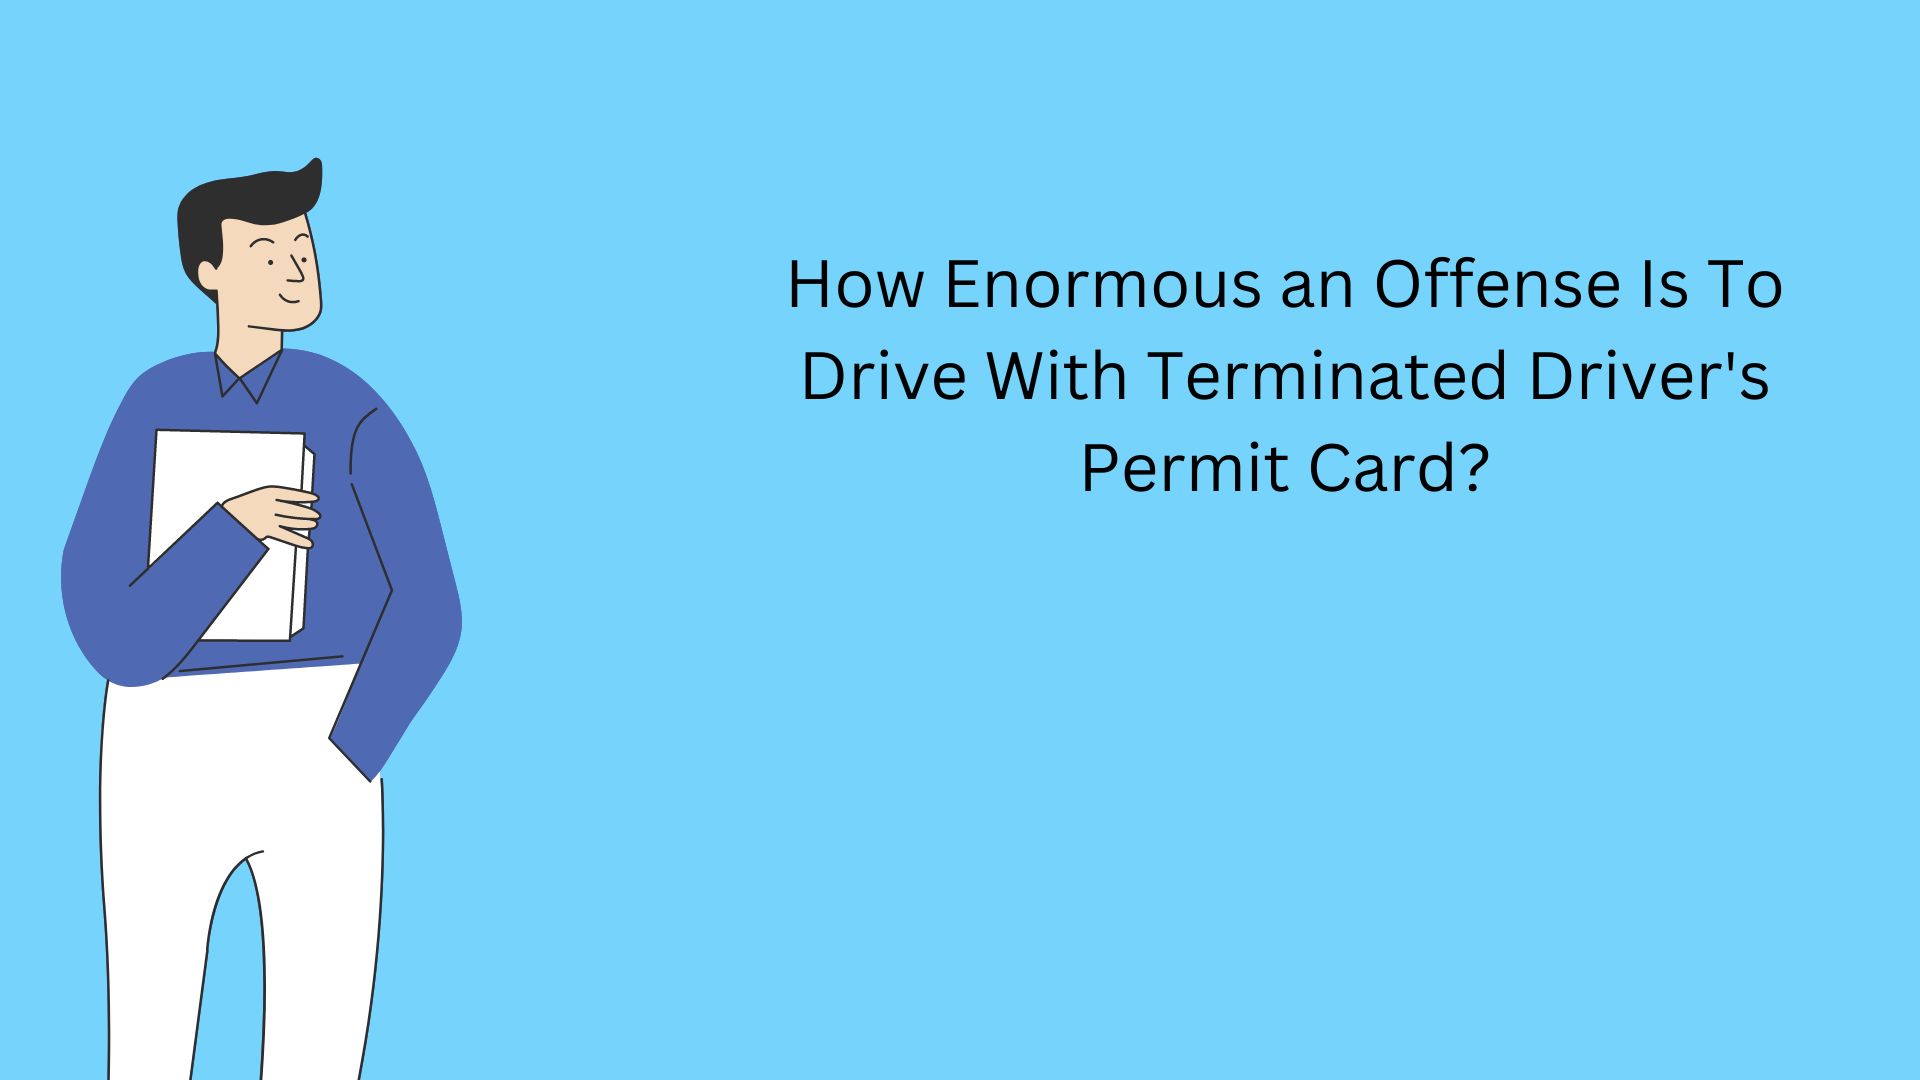 How Enormous an Offense Is To Drive With Terminated Driver's Permit Card